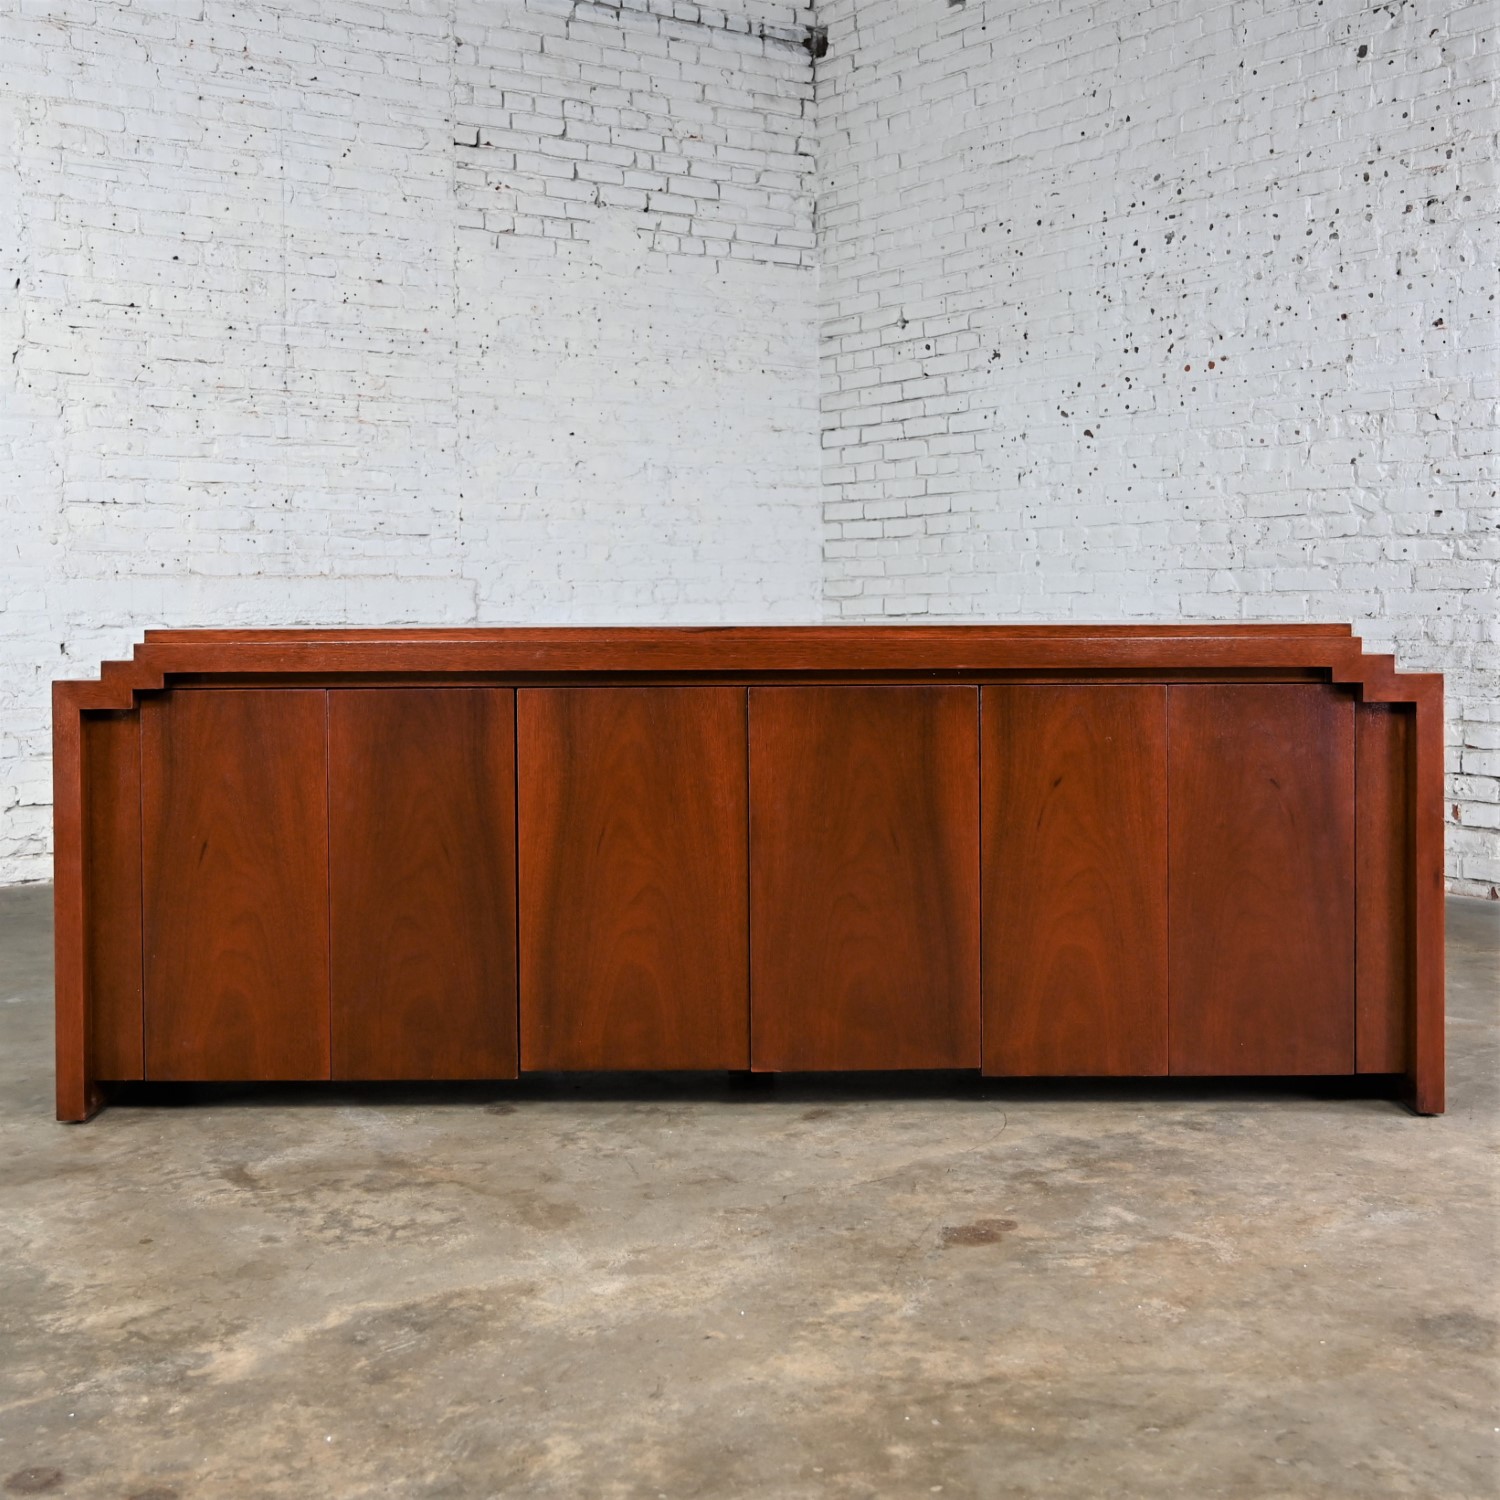 Late 20th Century Art Deco Revival to Postmodern Custom Mahogany Credenza Sideboard Buffet Cabinet